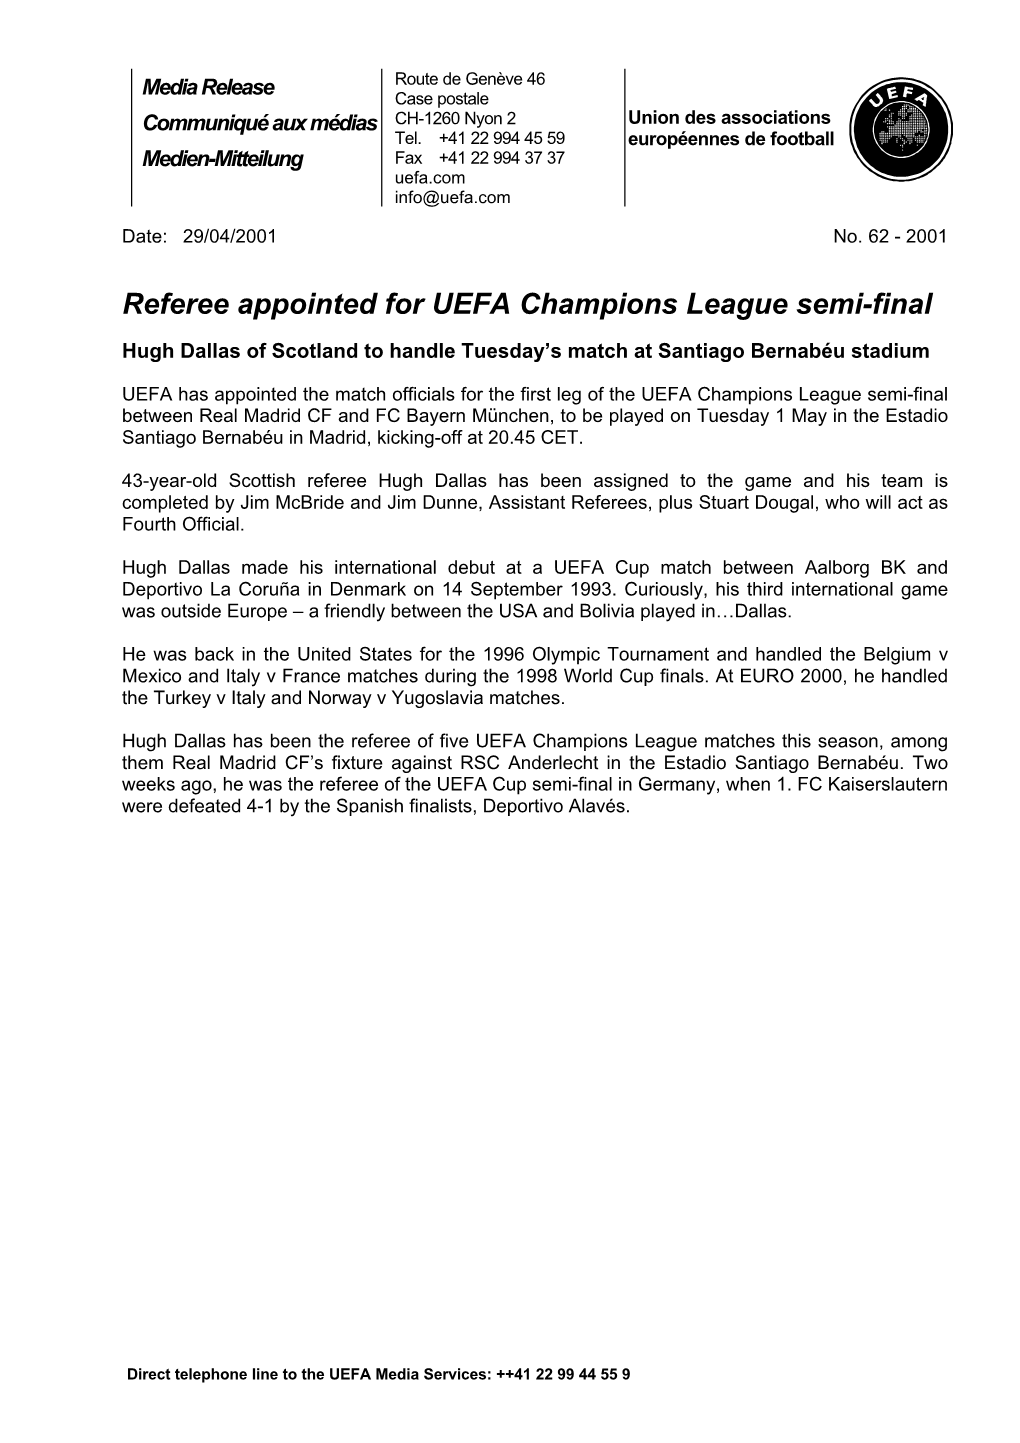 Referee Appointed for UEFA Champions League Semi-Final